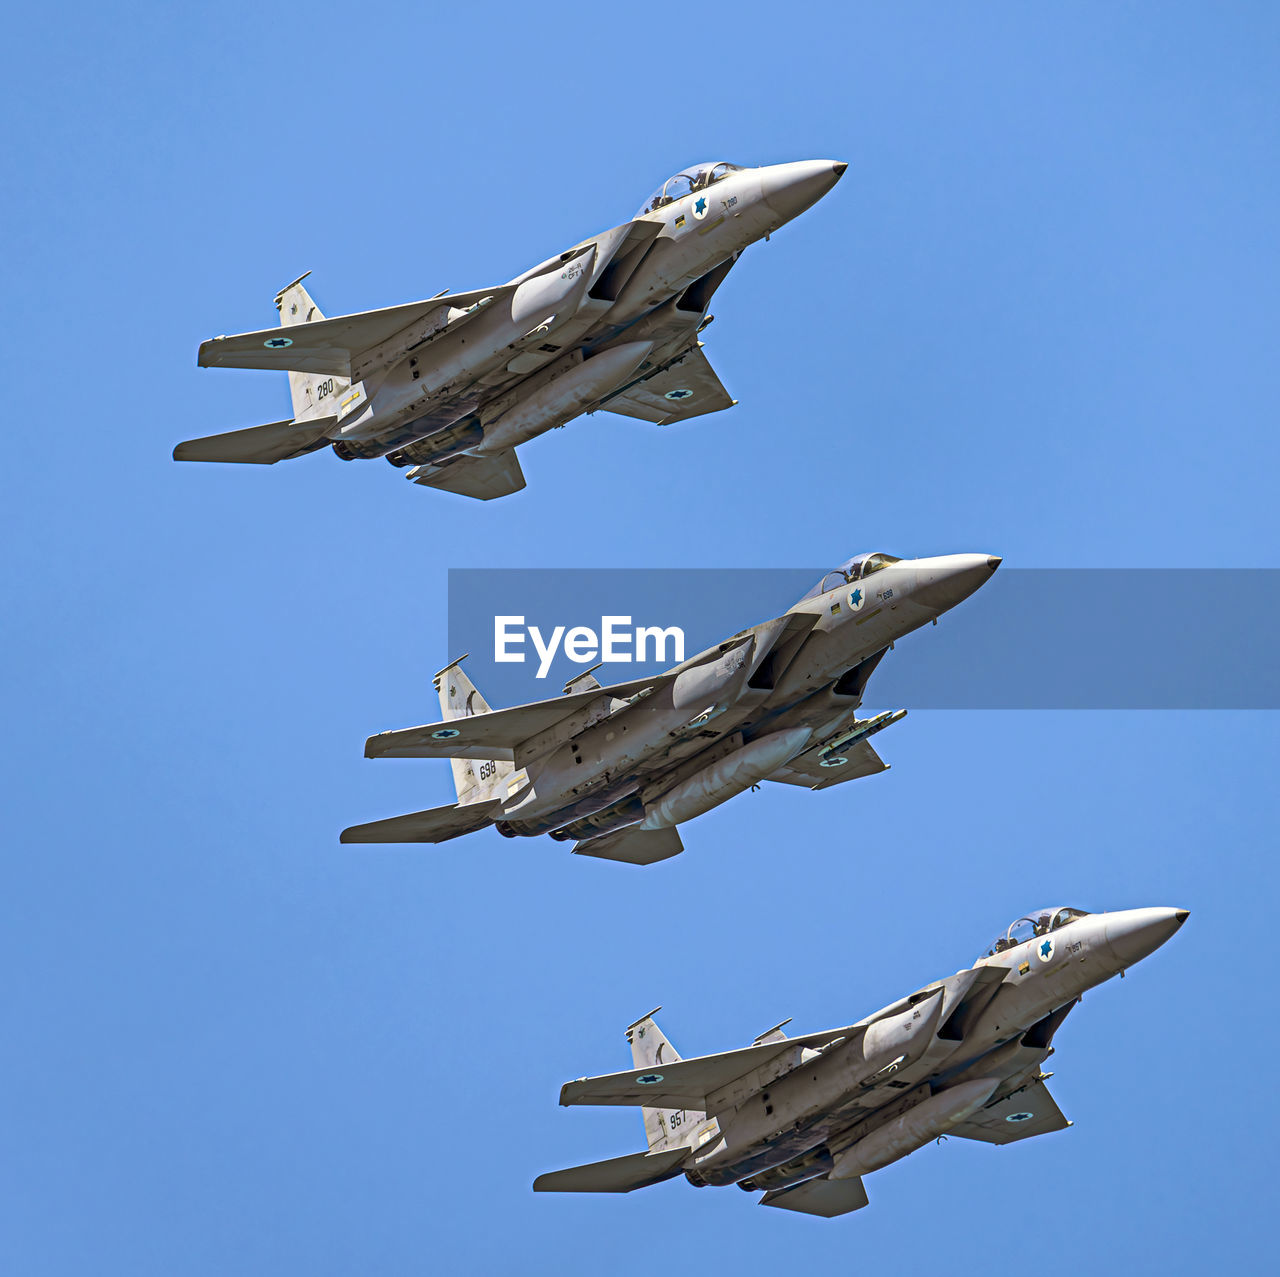 3 f-15s eagle flying over the dado beach in haifa for the independence day the 75th of israel.